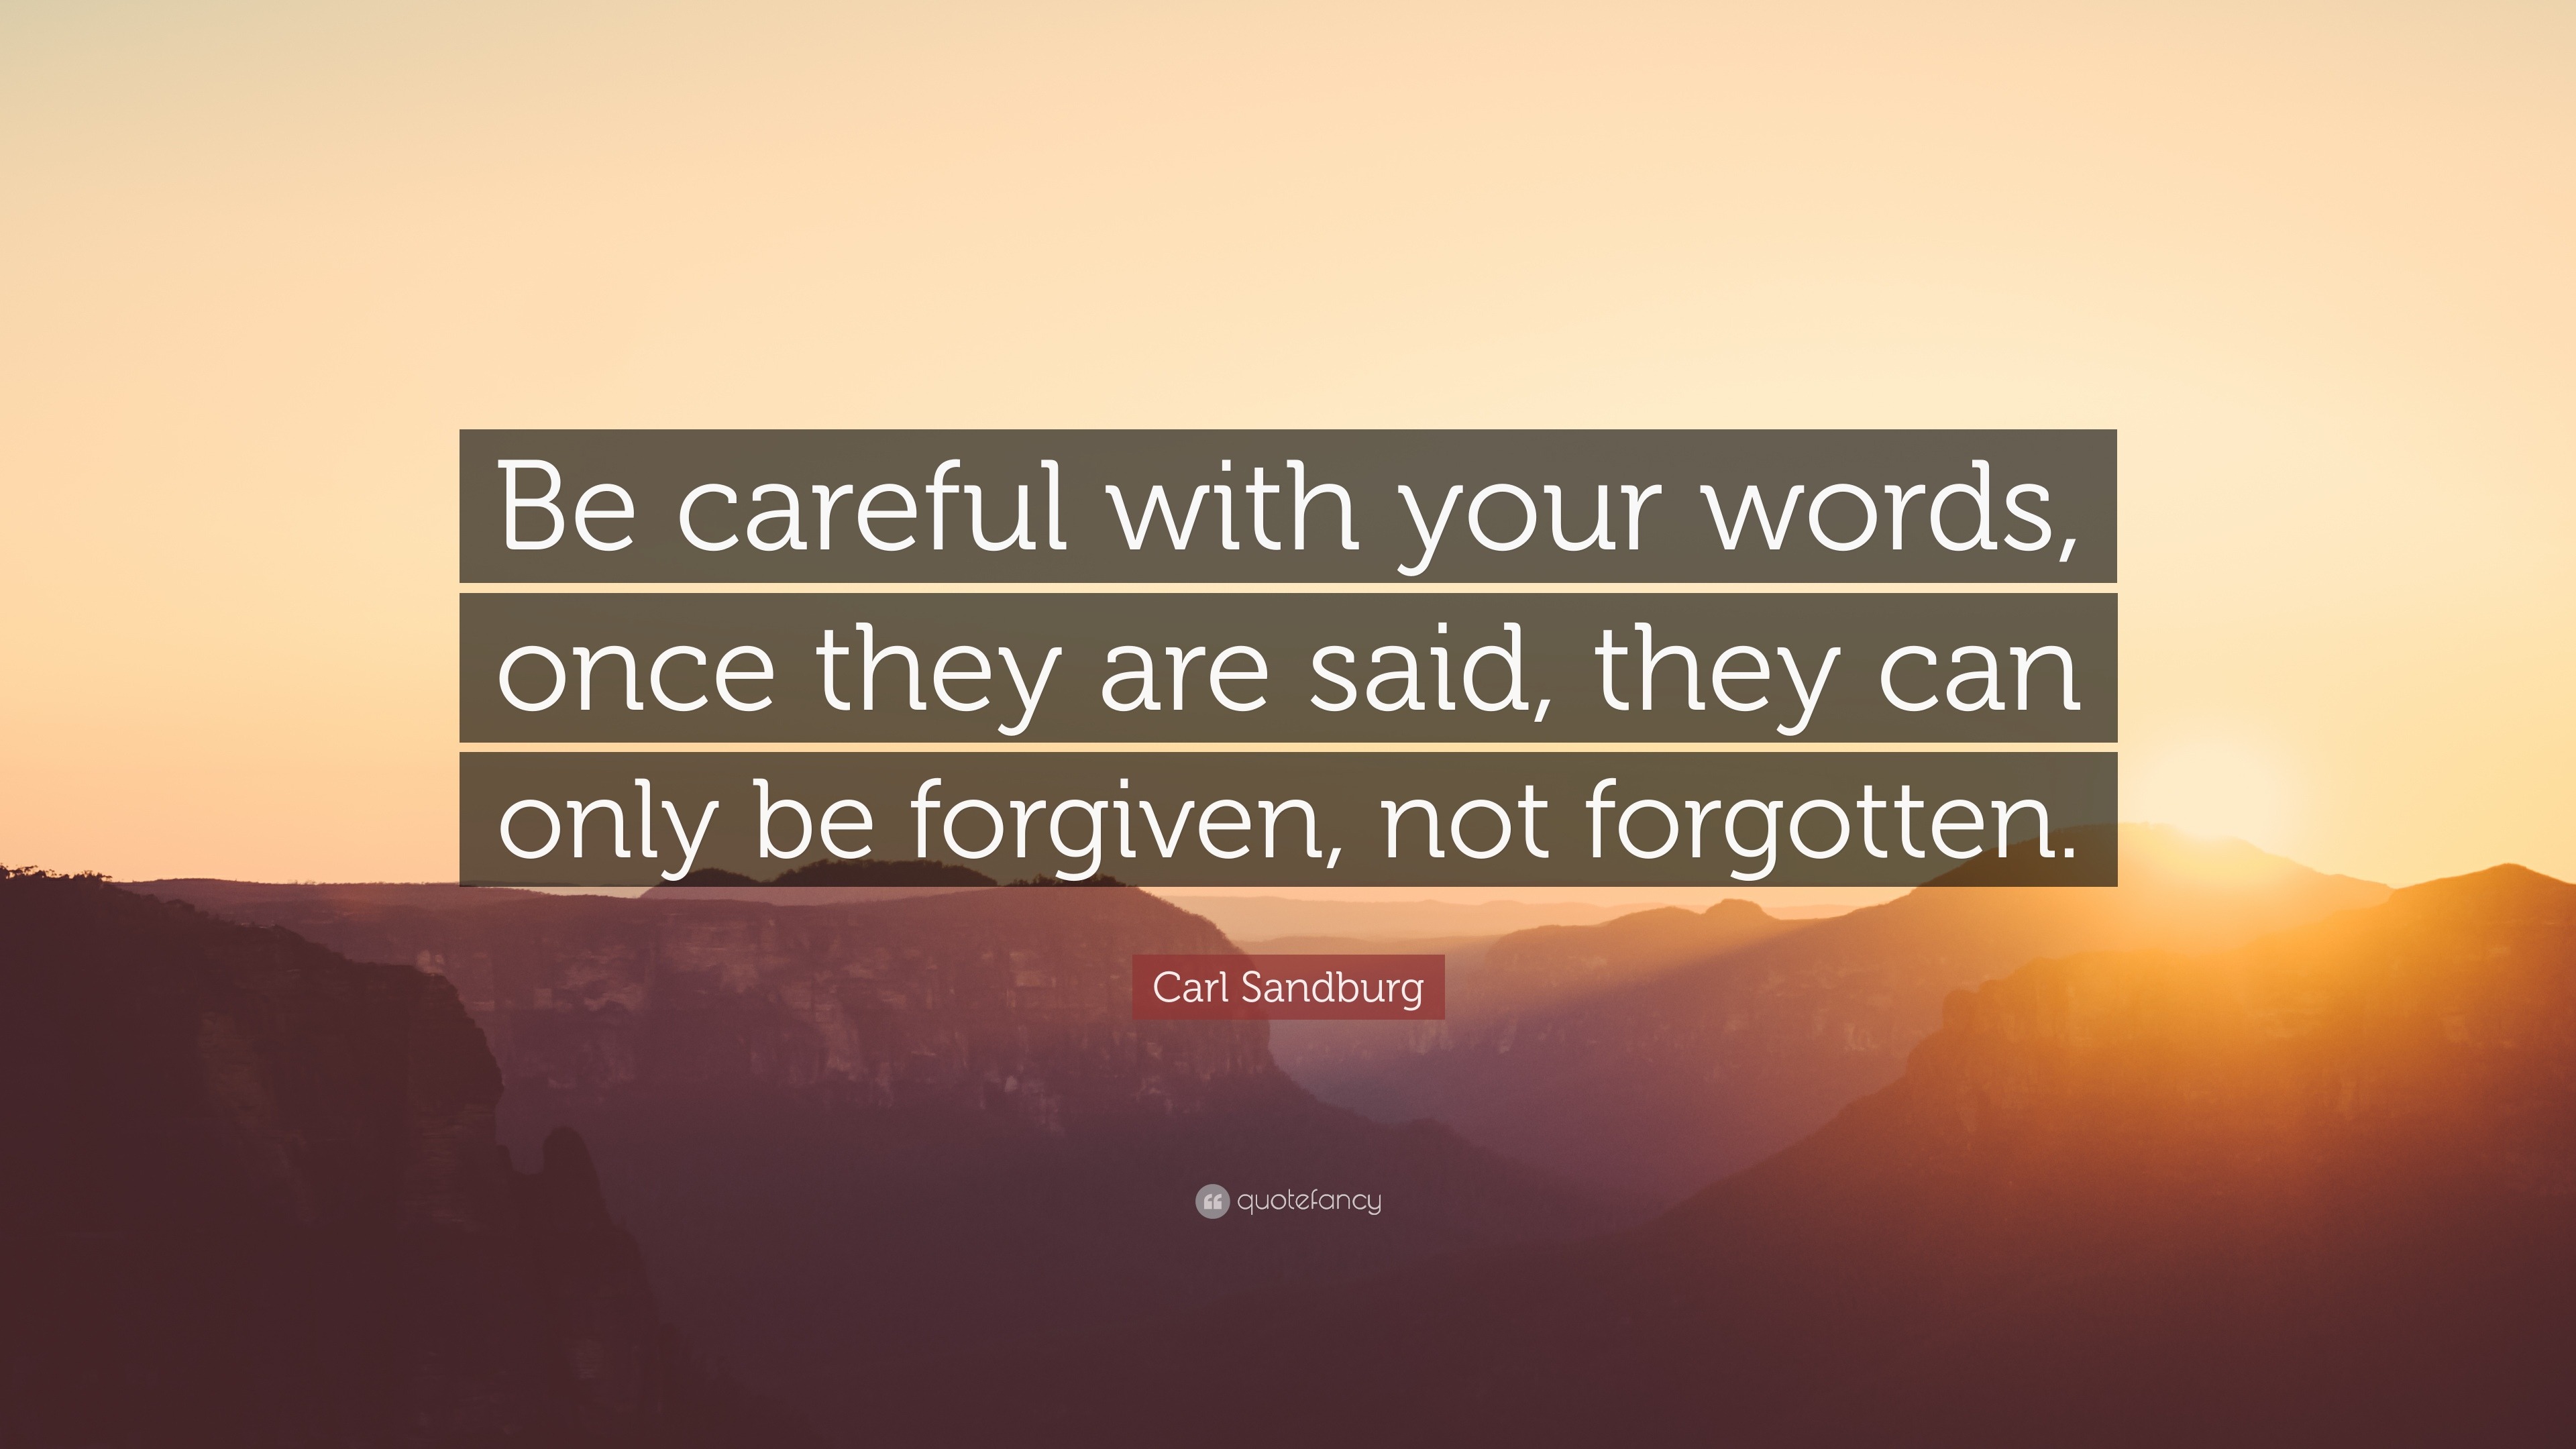 Carl Sandburg Quote: “Be careful with your words, once they are said ...